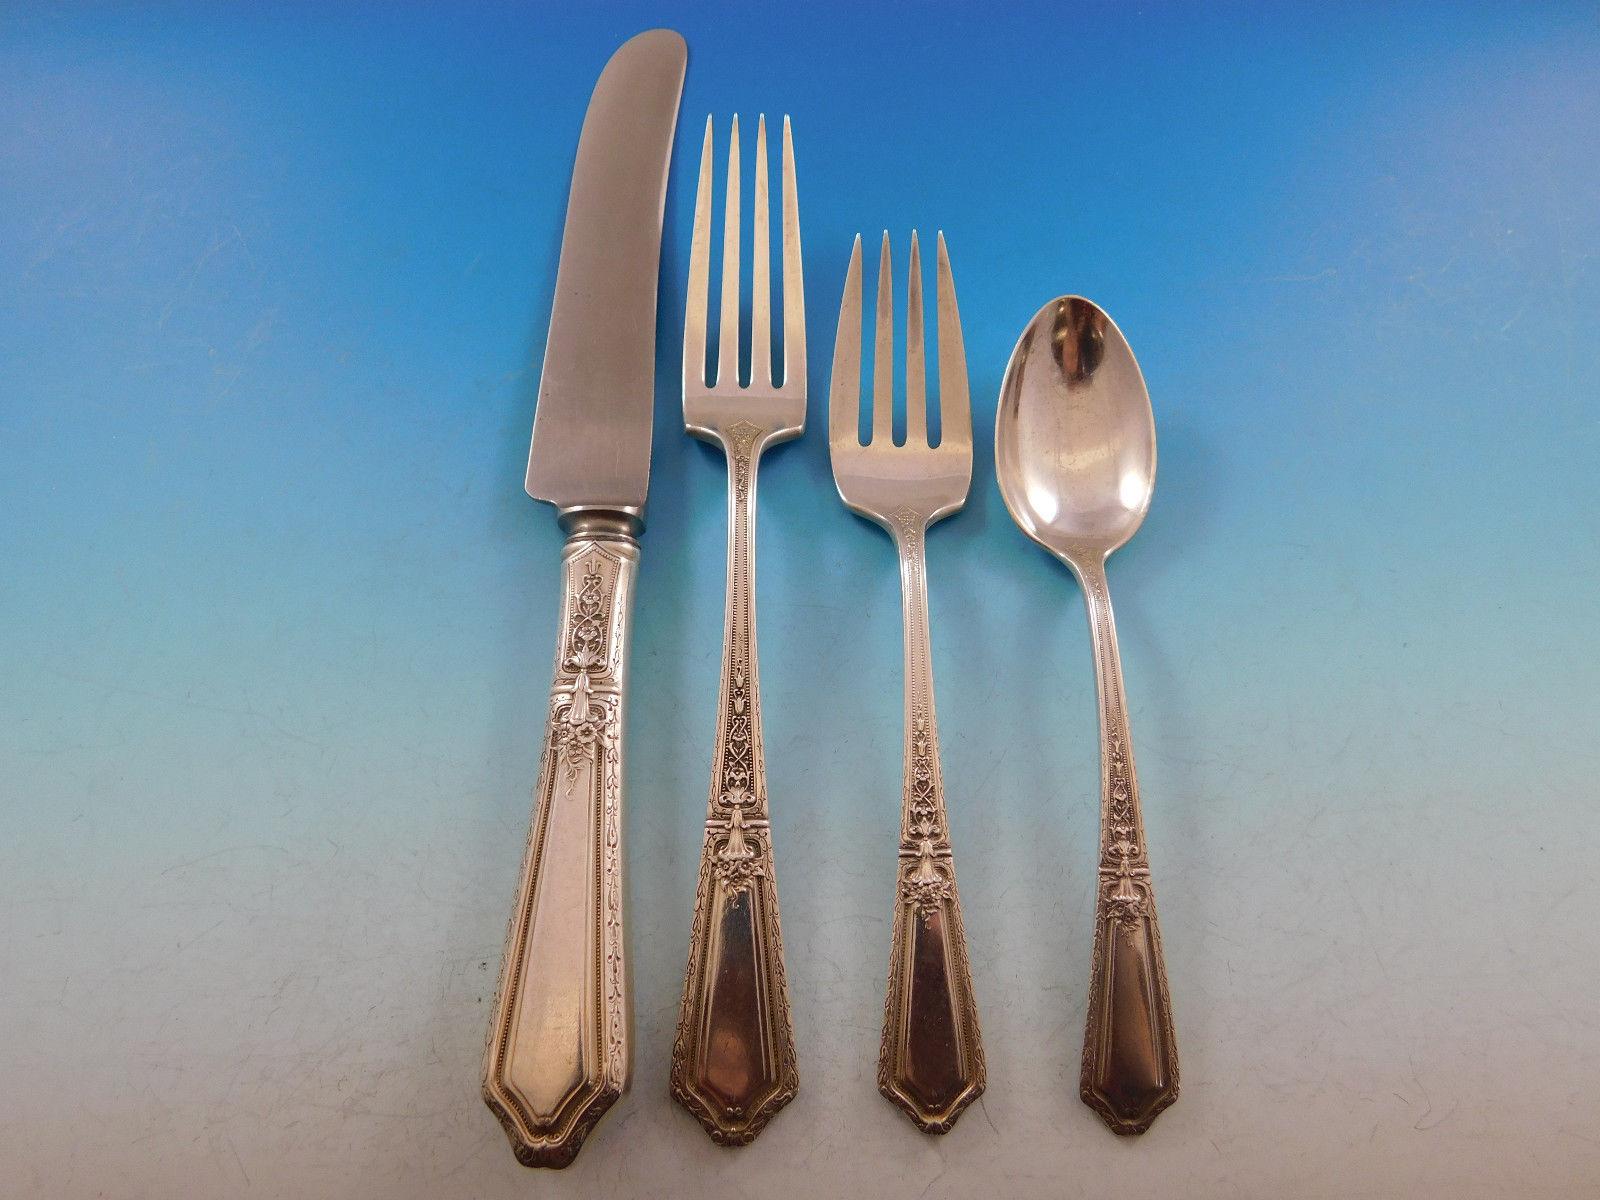 D'Orleans by Towle sterling silver flatware set - 55 pieces. This set includes

8 knives, 9 3/8